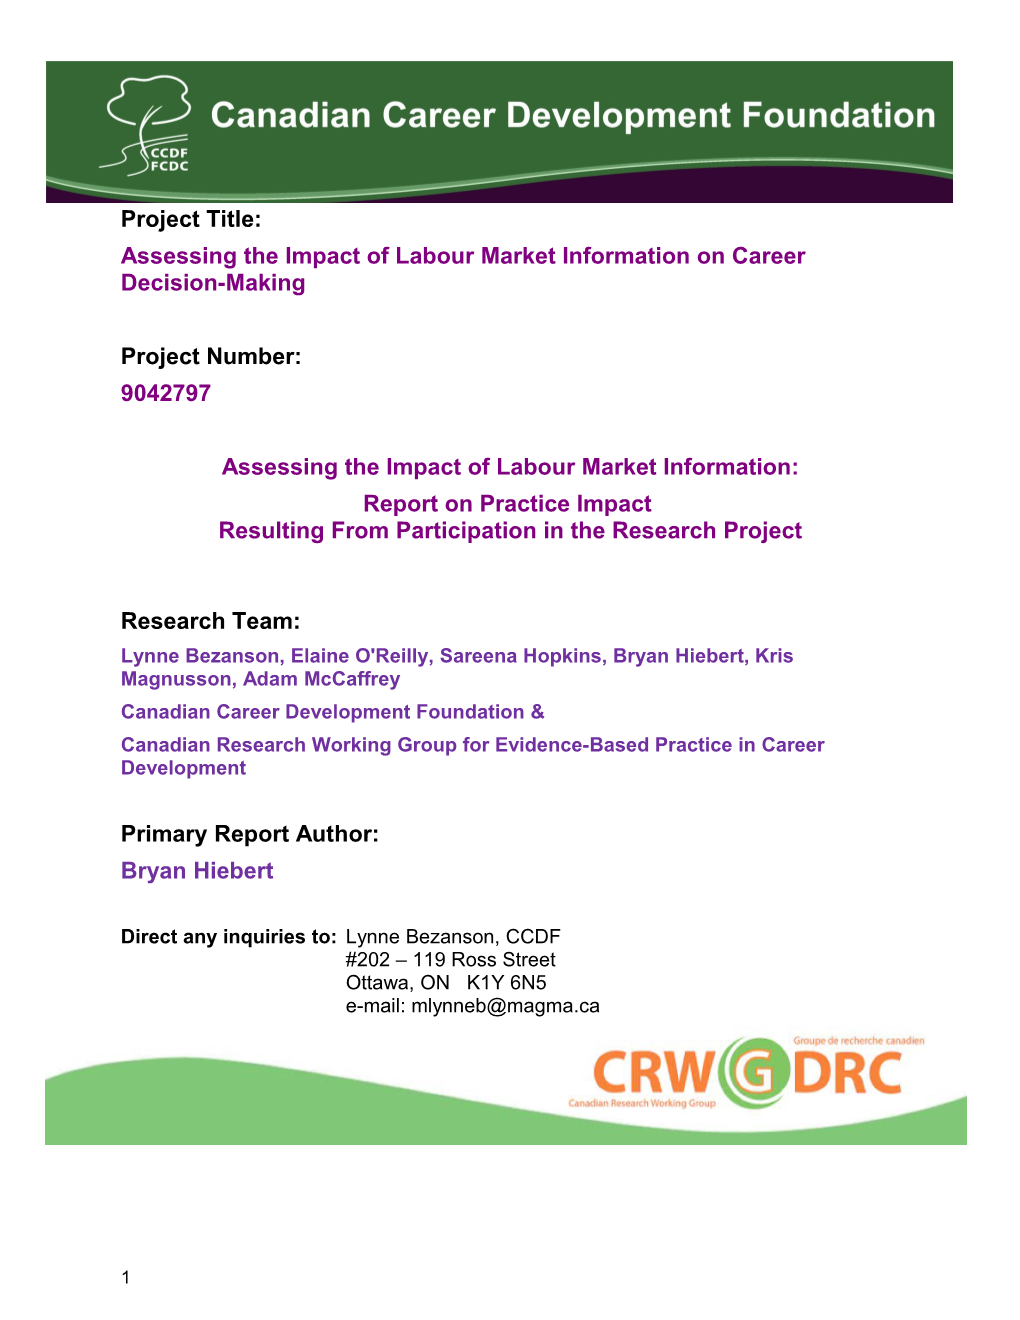 Assessing the Impact of Labour Market Information on Career Decision-Making